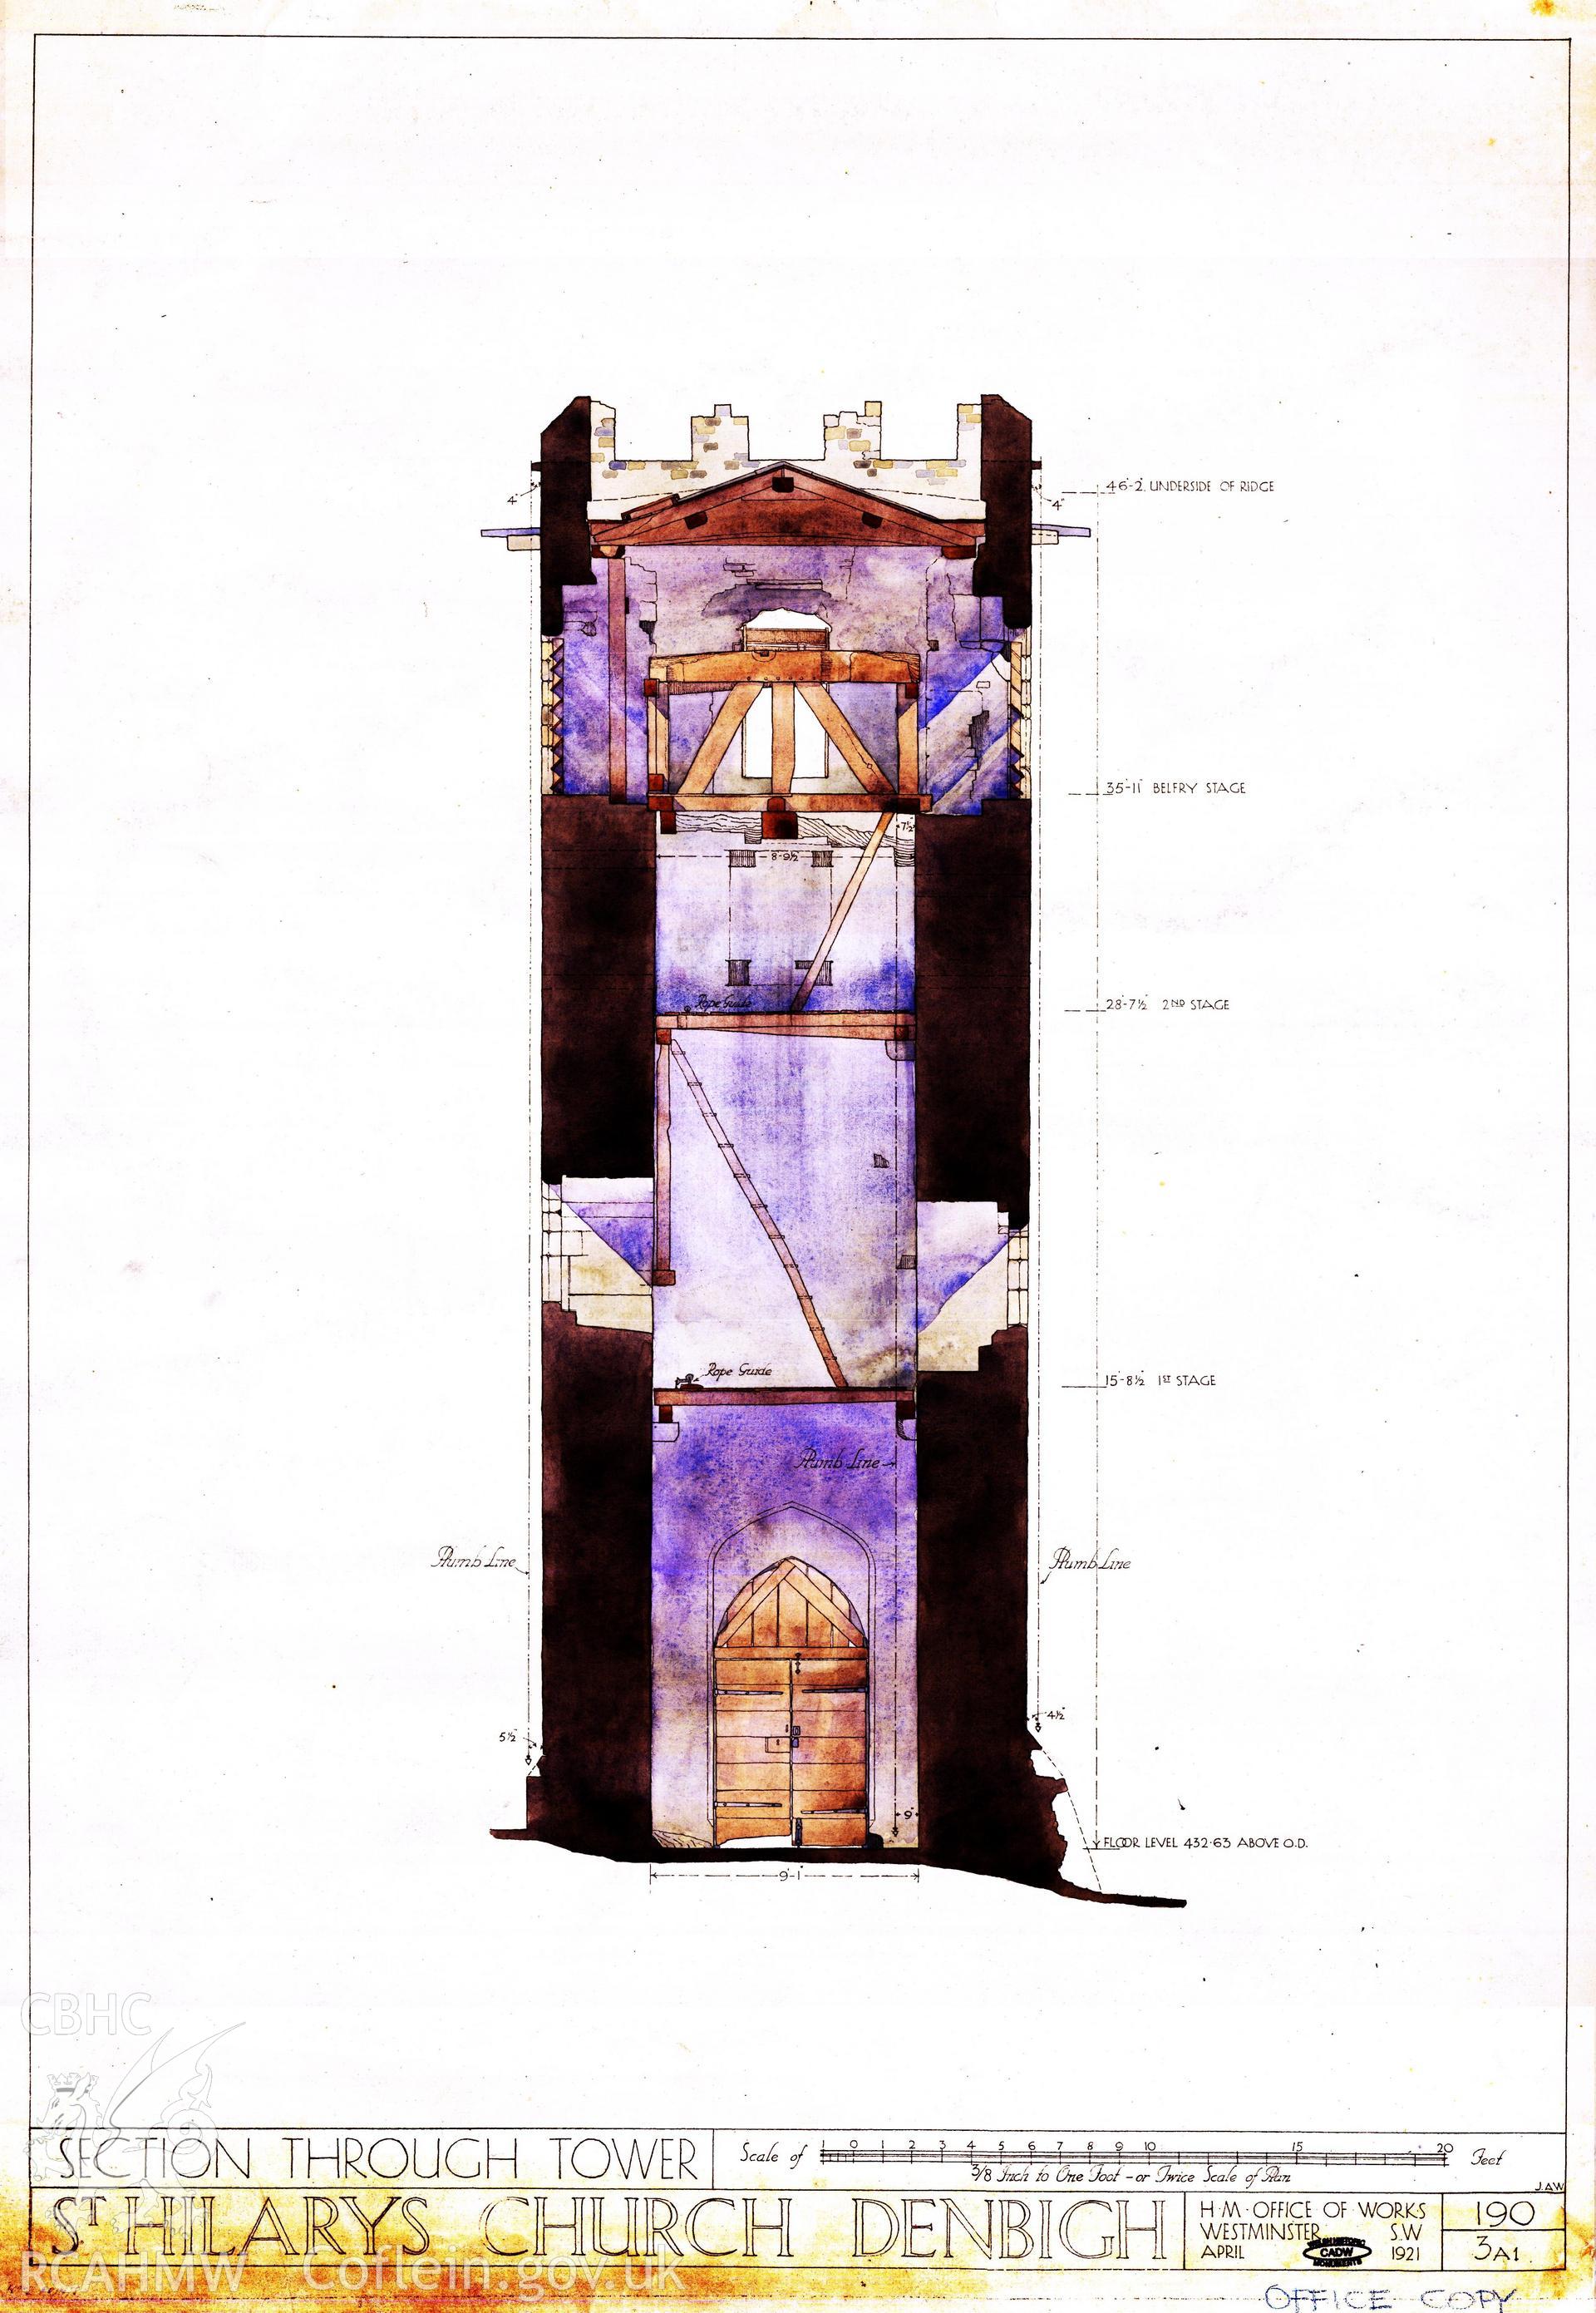 Cadw guardianship monument drawing of Denbigh St Hillary's Church. Section of tower (tinted). Cadw Ref. No:190/3A1. Scale 1:32.